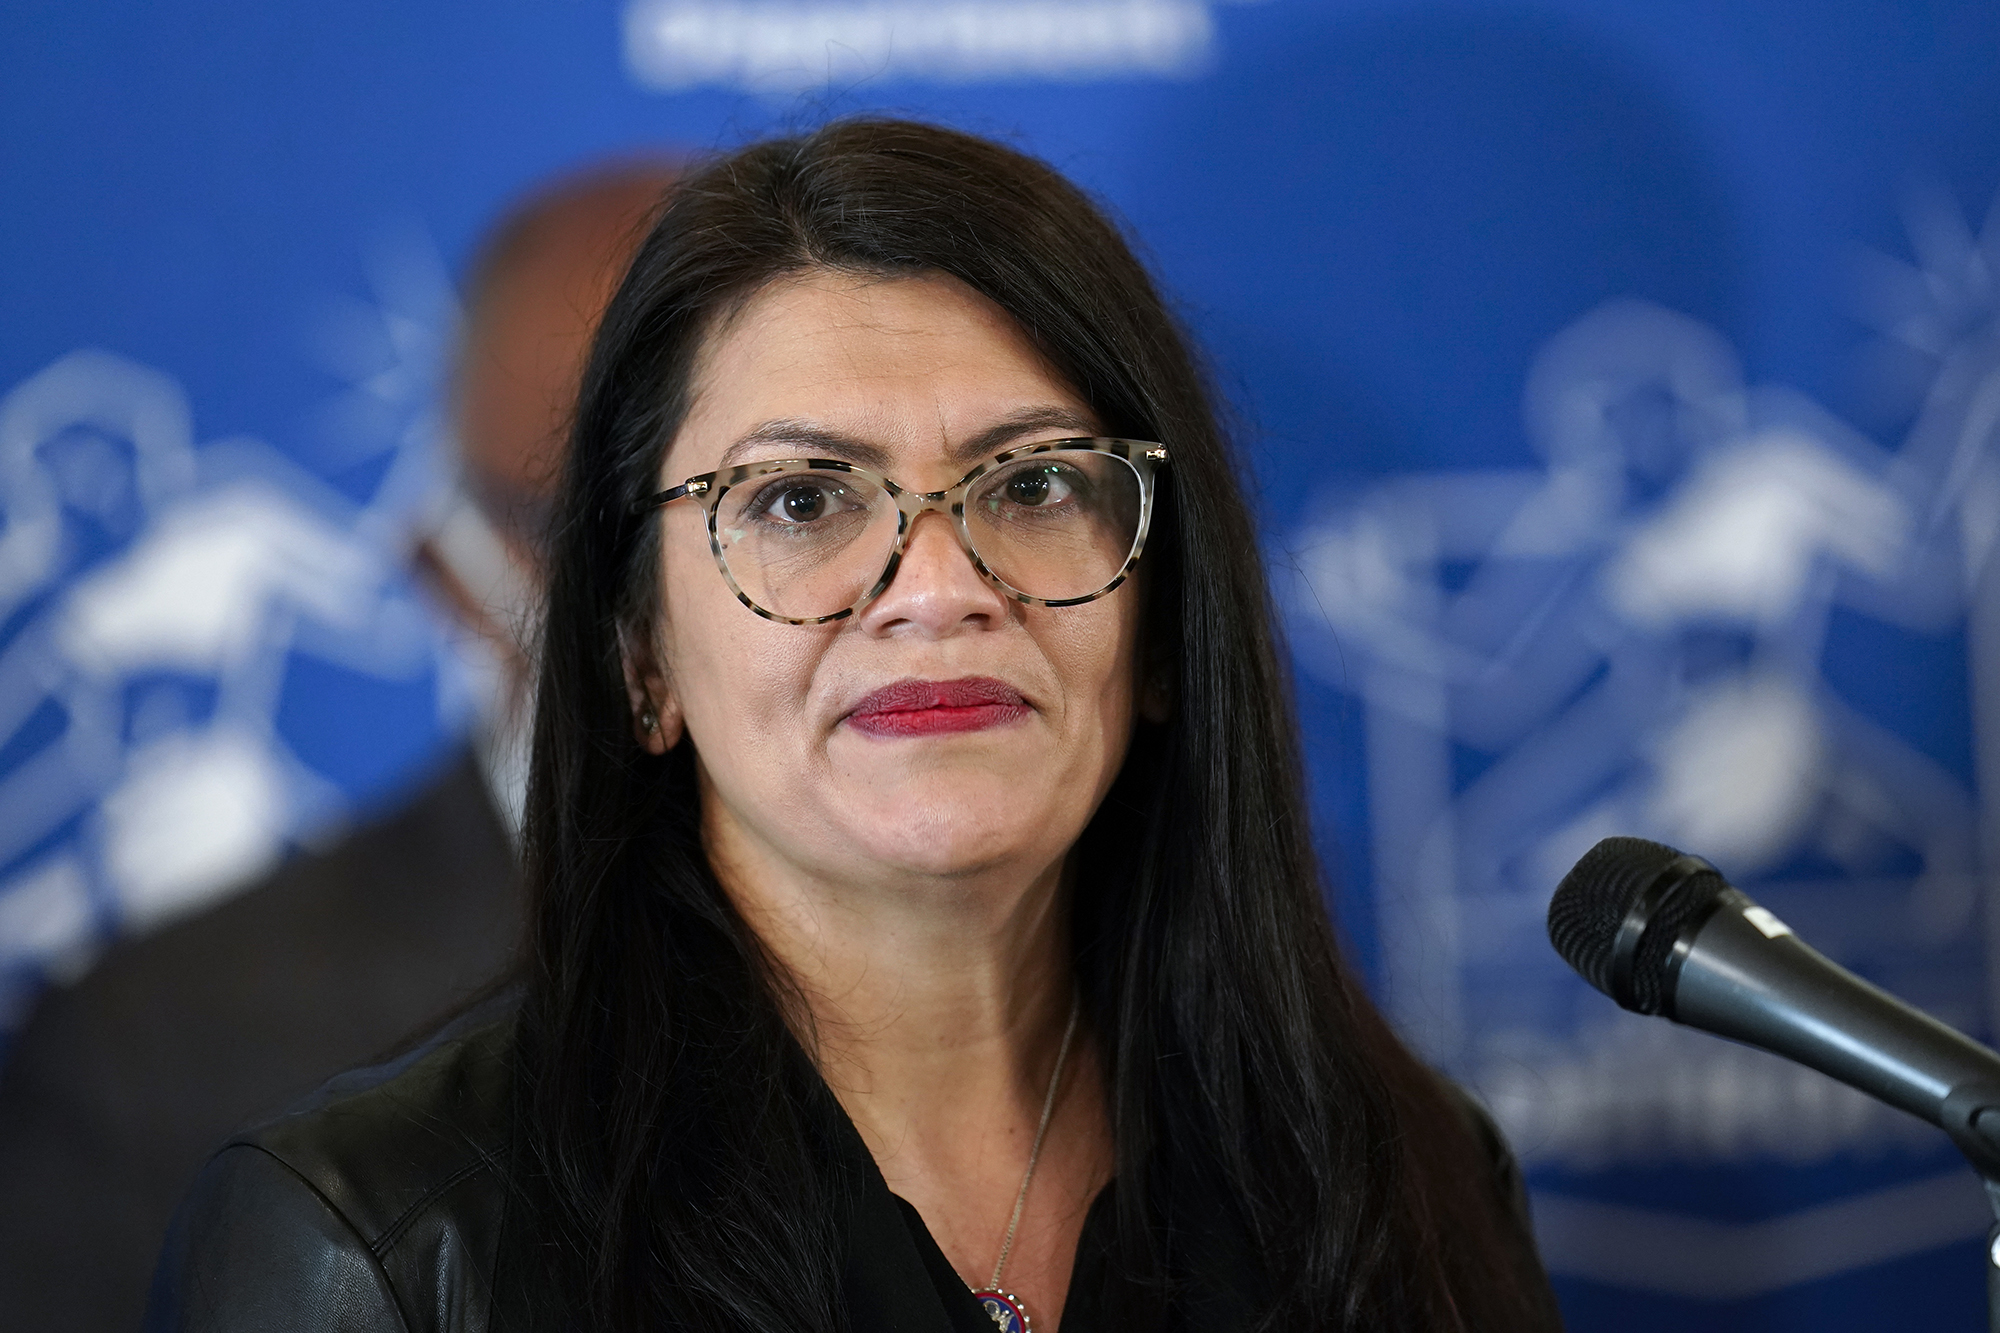 Rashida Tlaib attends a news conference in Detroit, Michigan, on February 18, 2022.